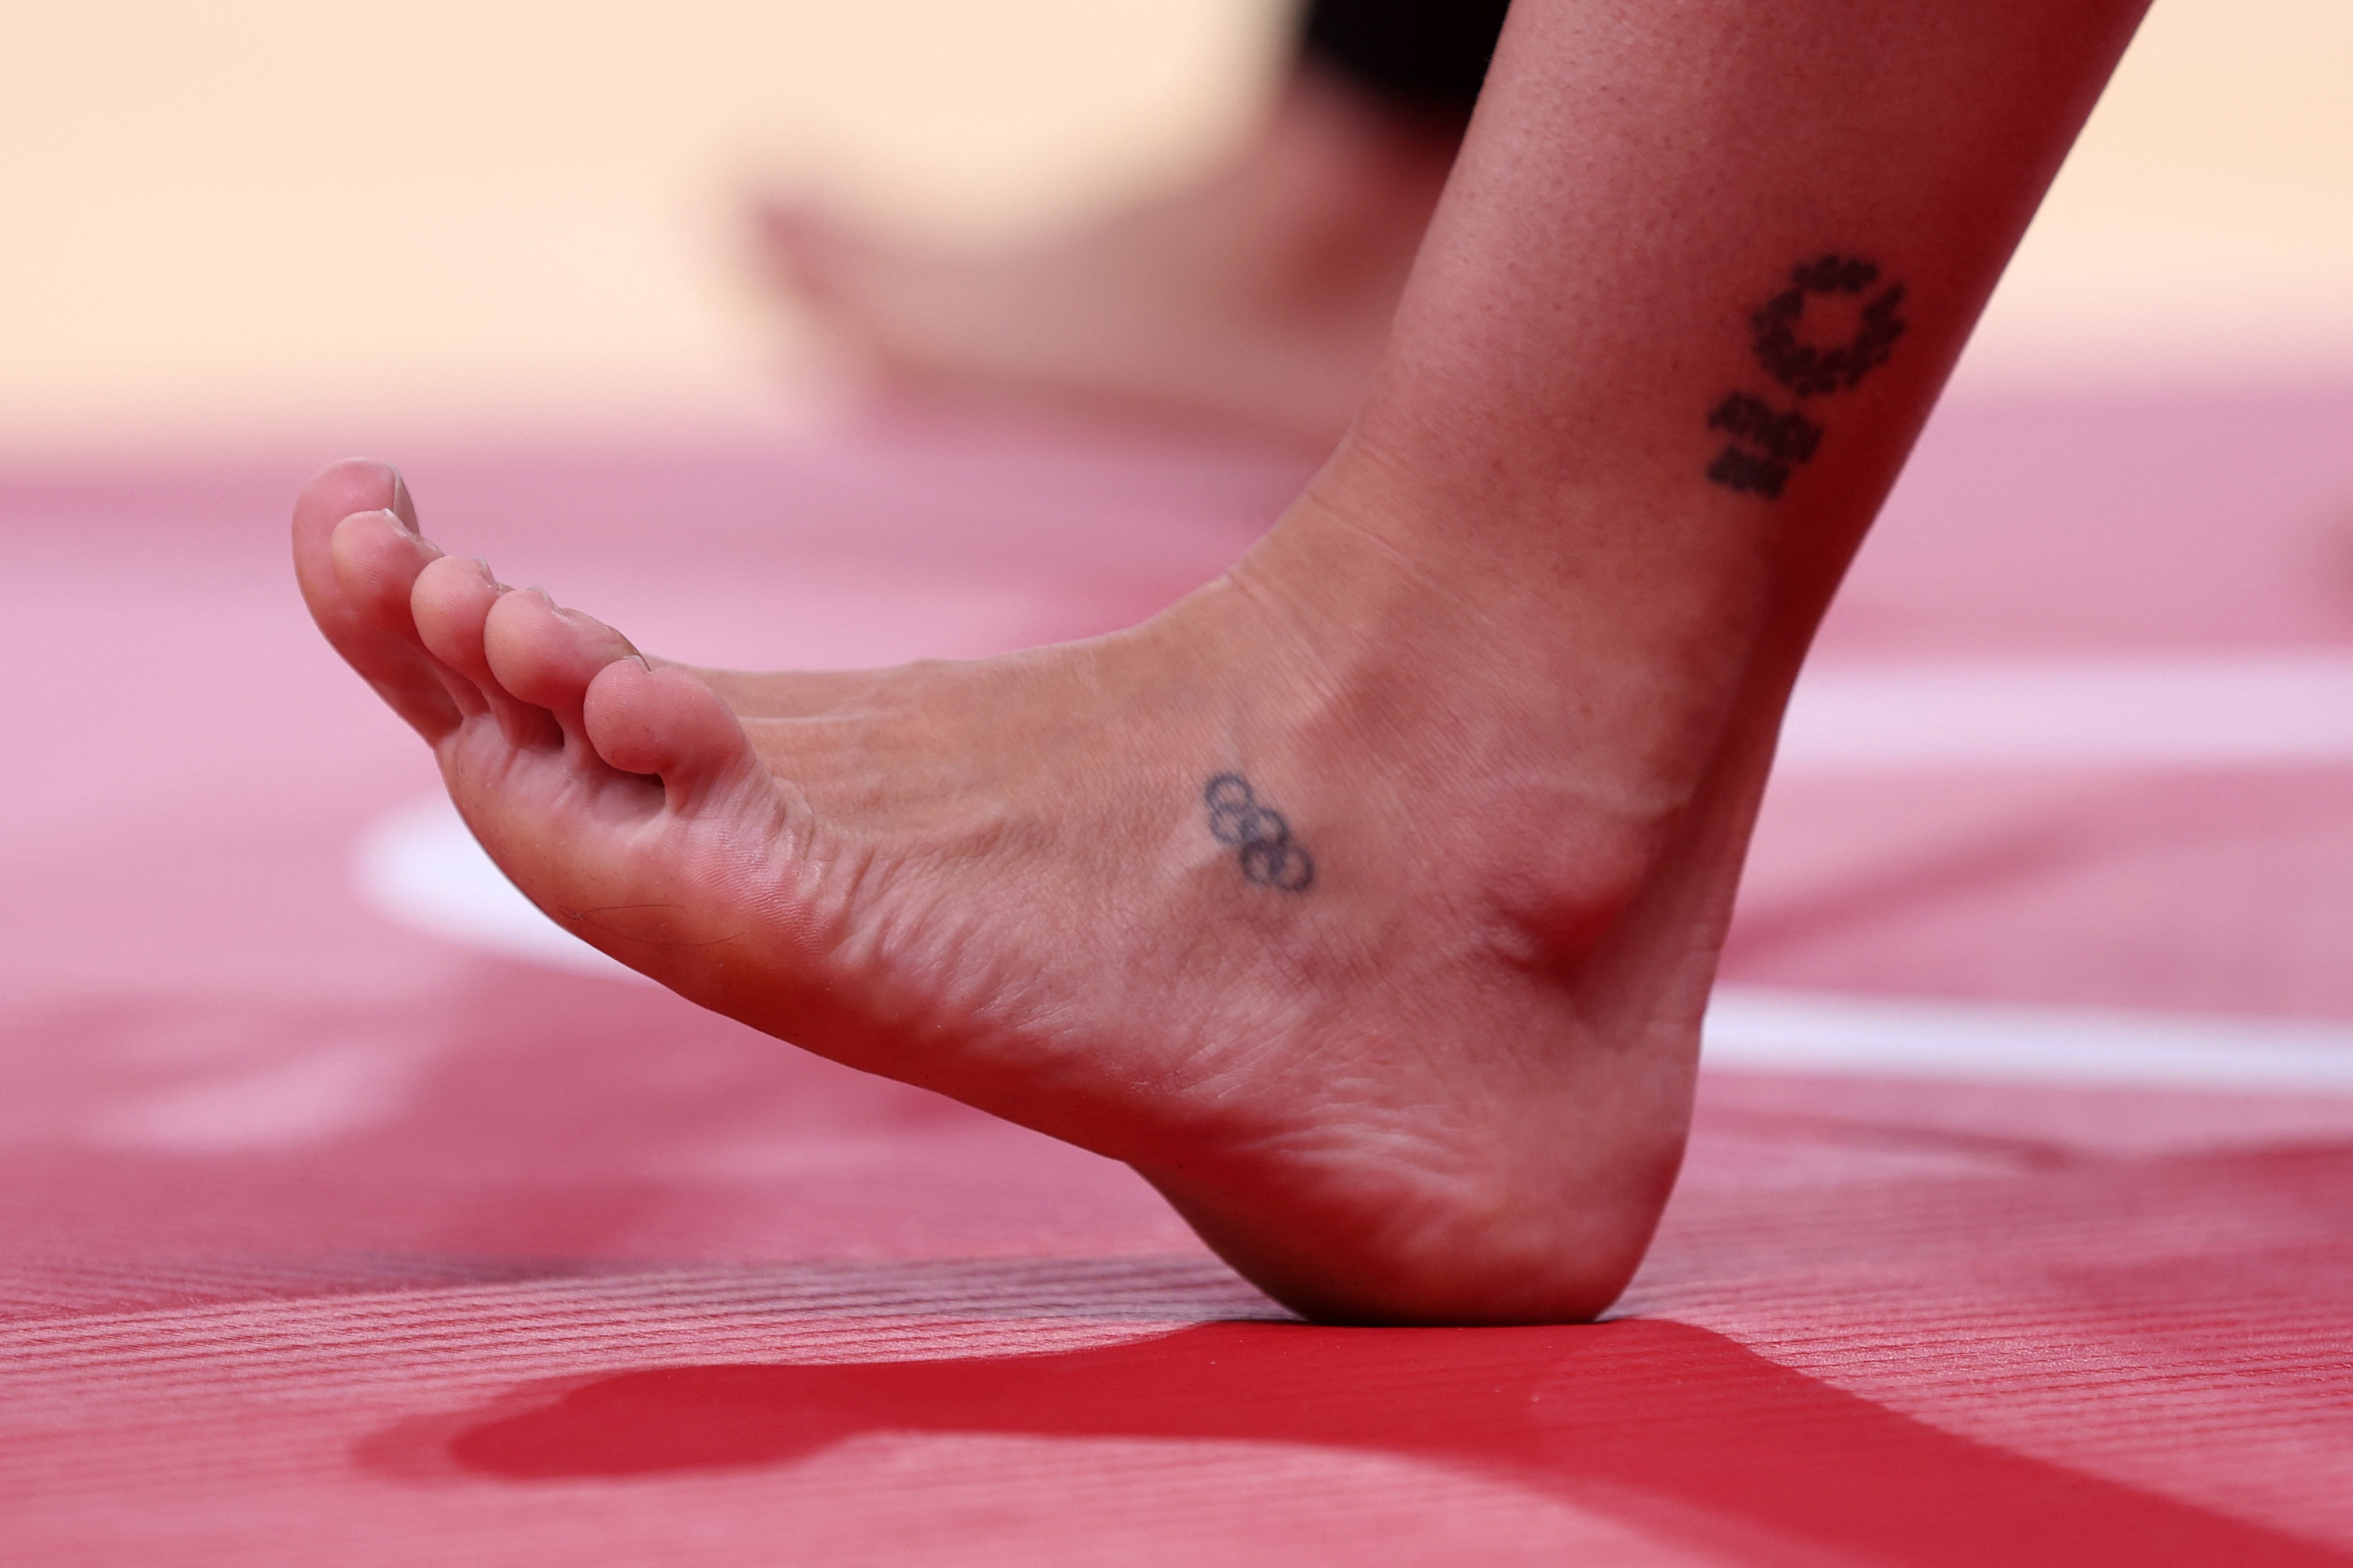 This Is The Hottest Tattoo At The Tokyo Olympics